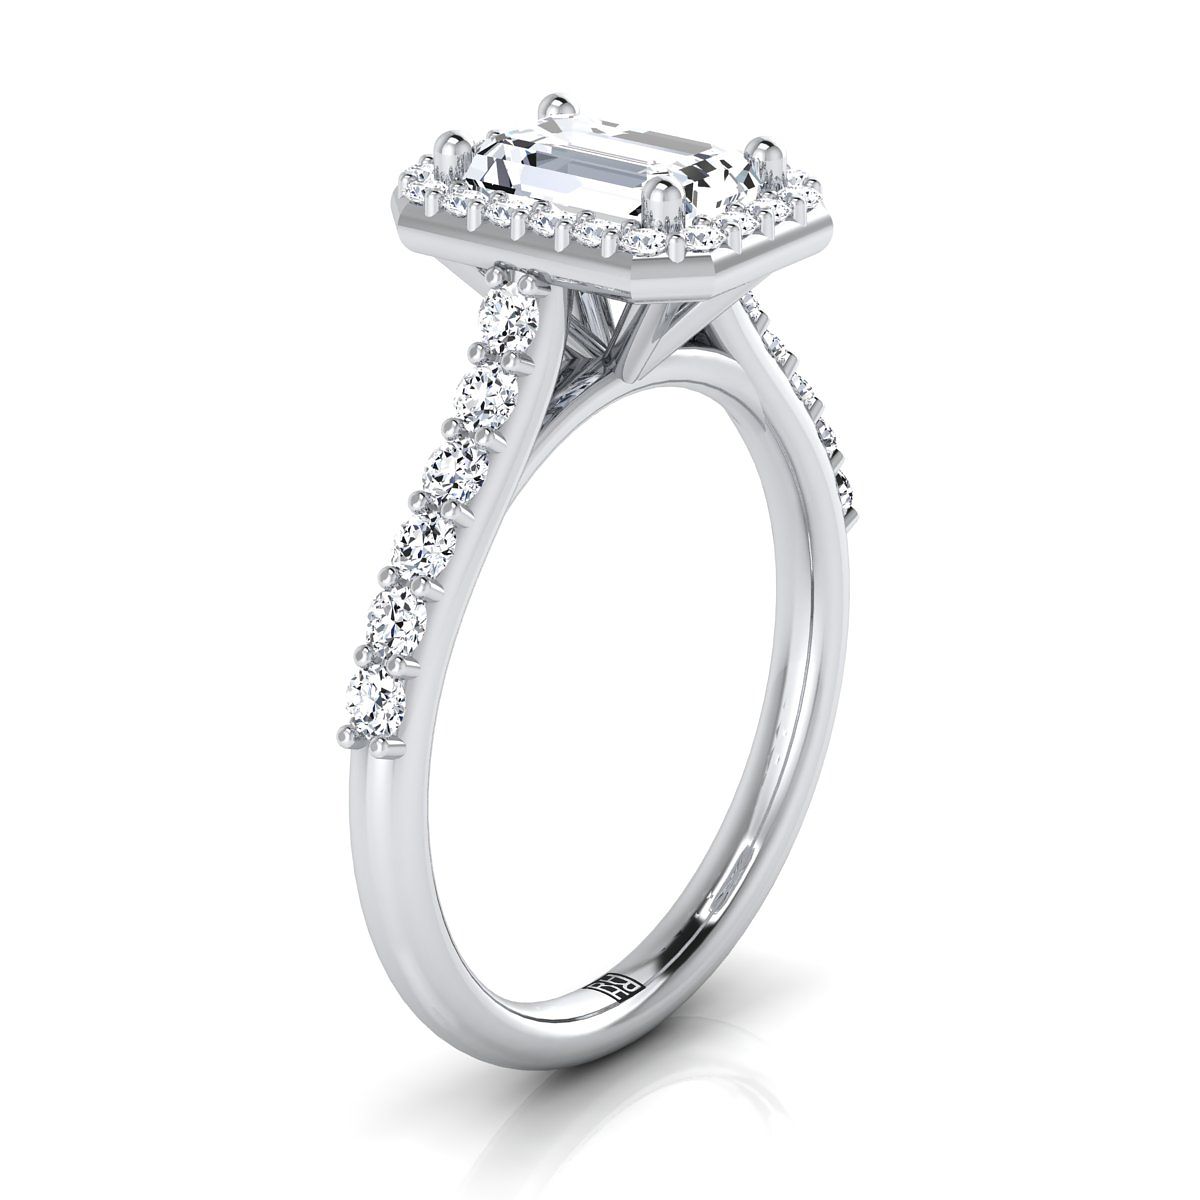 14K White Gold Emerald Cut Diamond Shared Prong Halo with French Pave Engagement Ring -1/2ctw